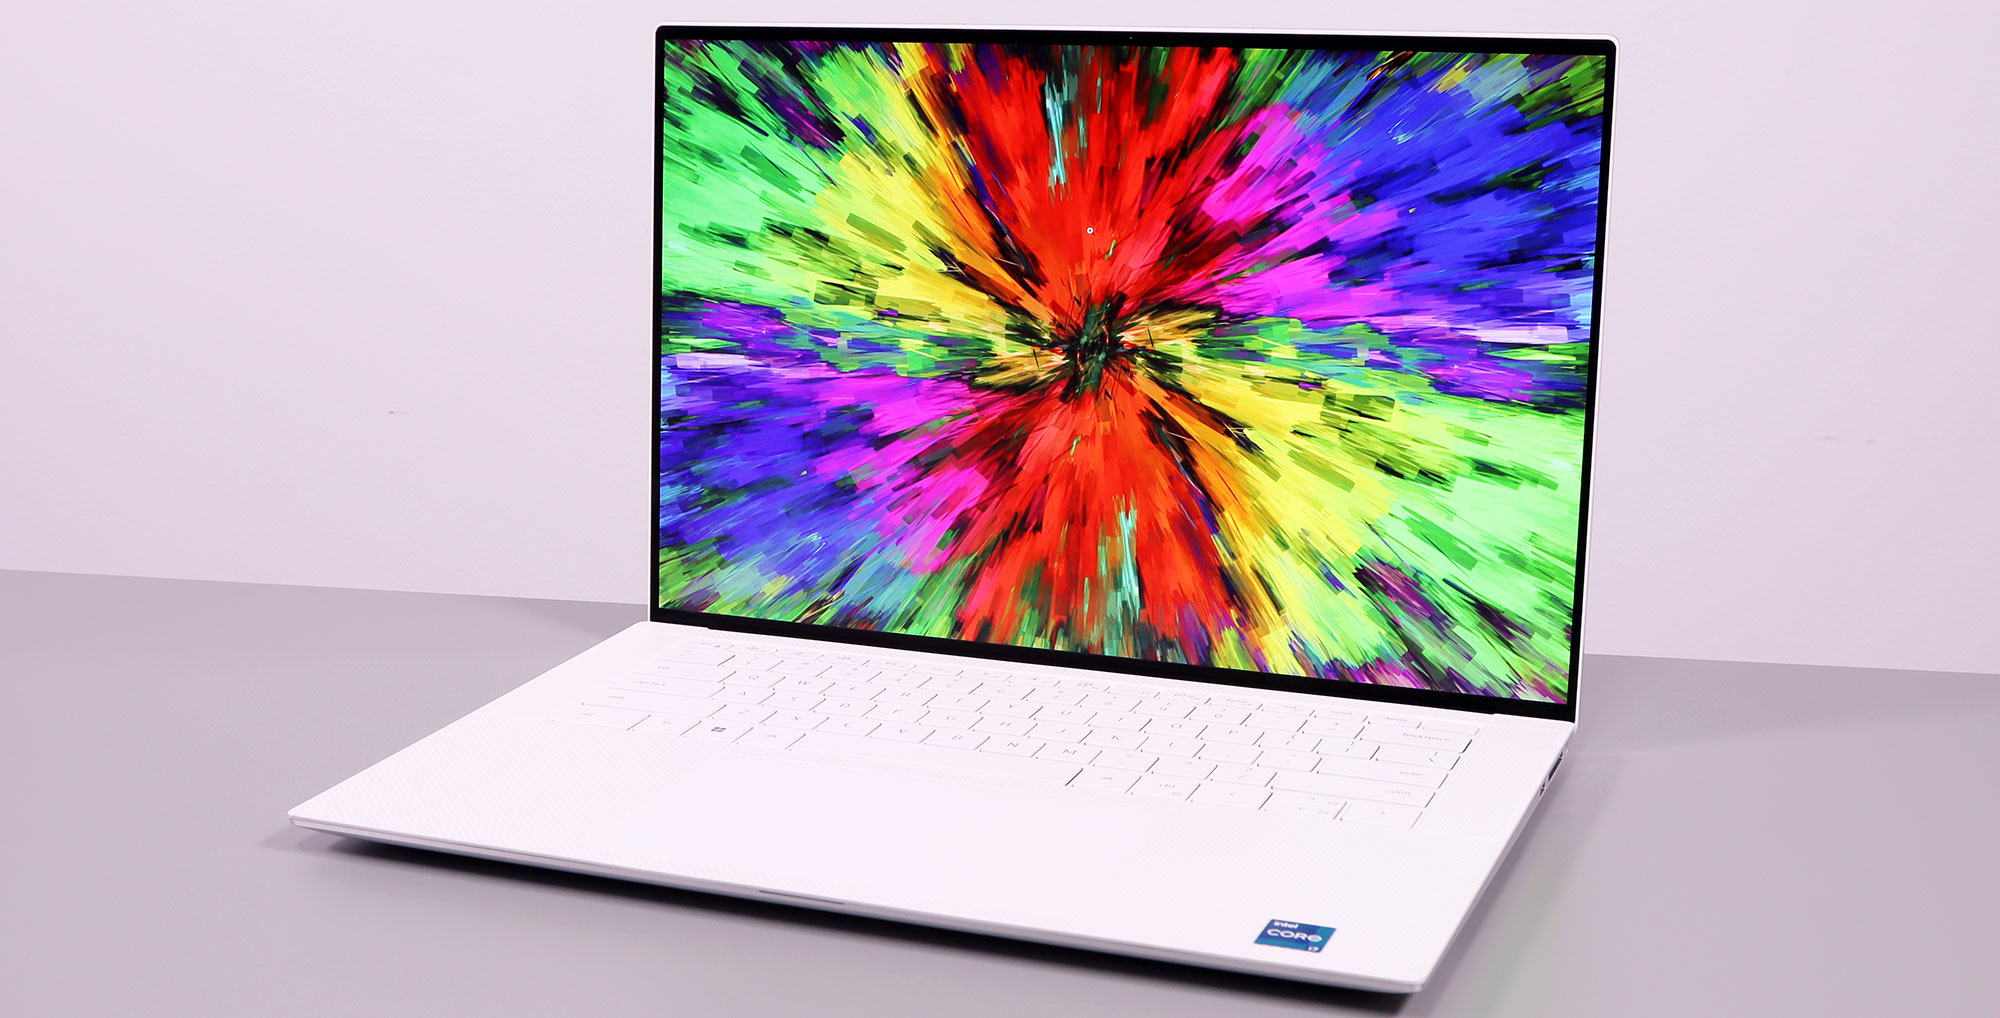 The XPS 15 is still the best-balanced premium OLED laptop on the market